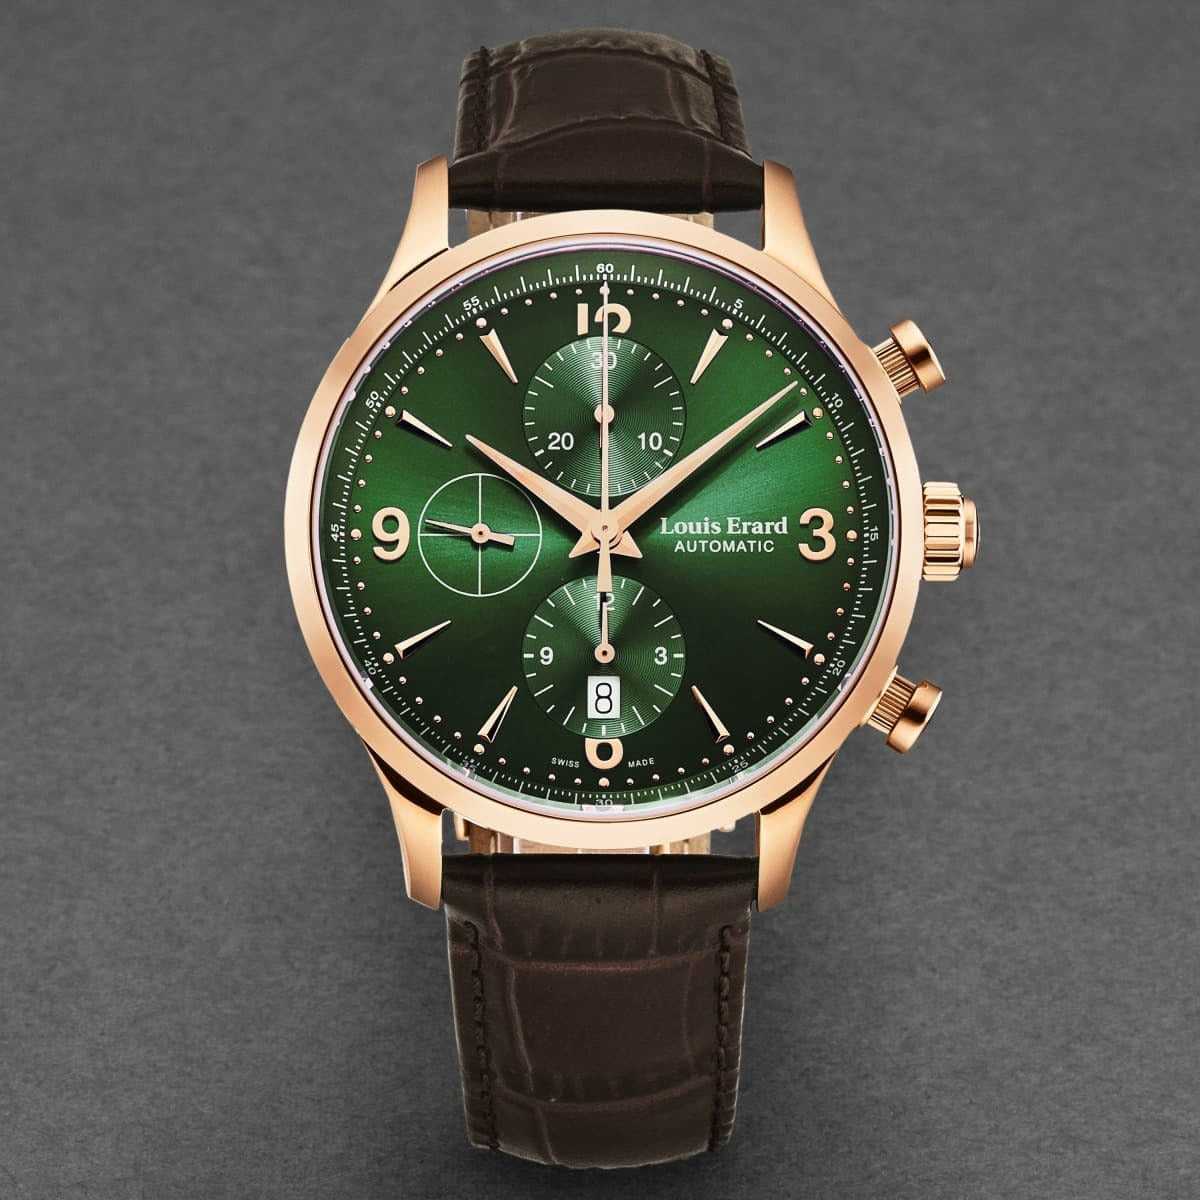 A Louis Erard Men's '1931' Chronograph Green Dial Brown Leather Strap Automatic Watch 78225PR19.BRC03 with a green dial and brown leather strap.